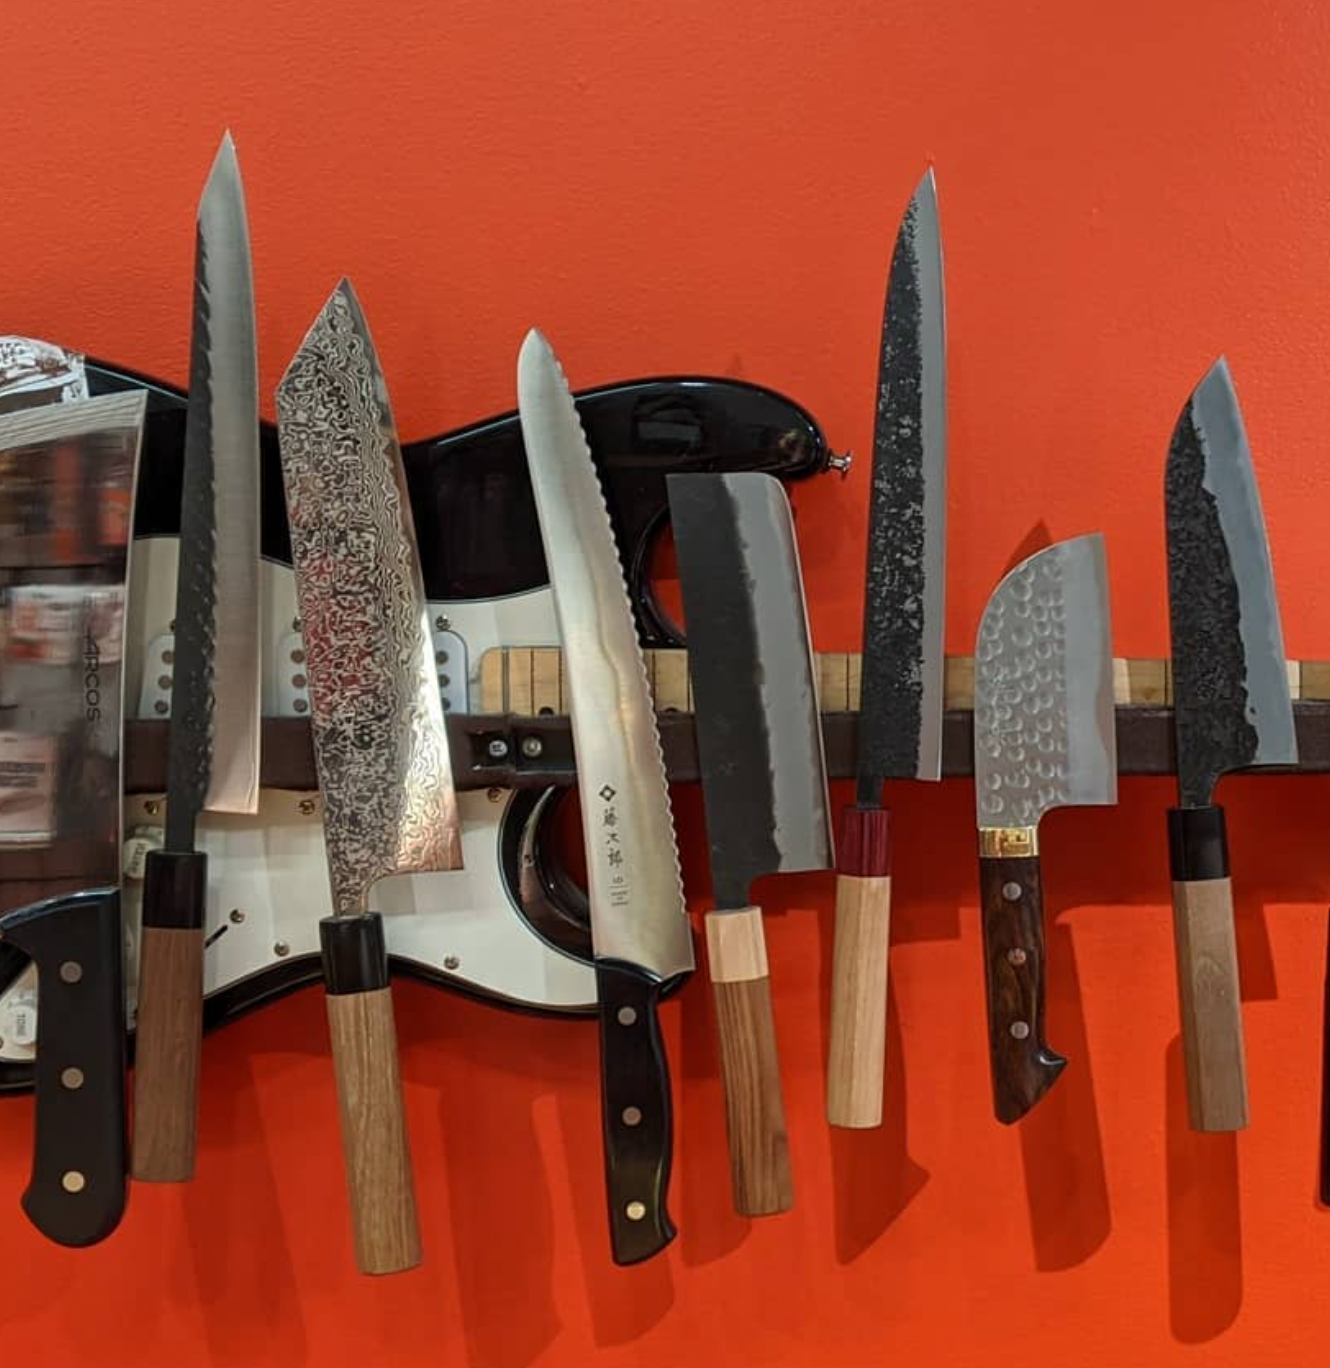 How to Shop For a Knife Like You Know What You're Doing